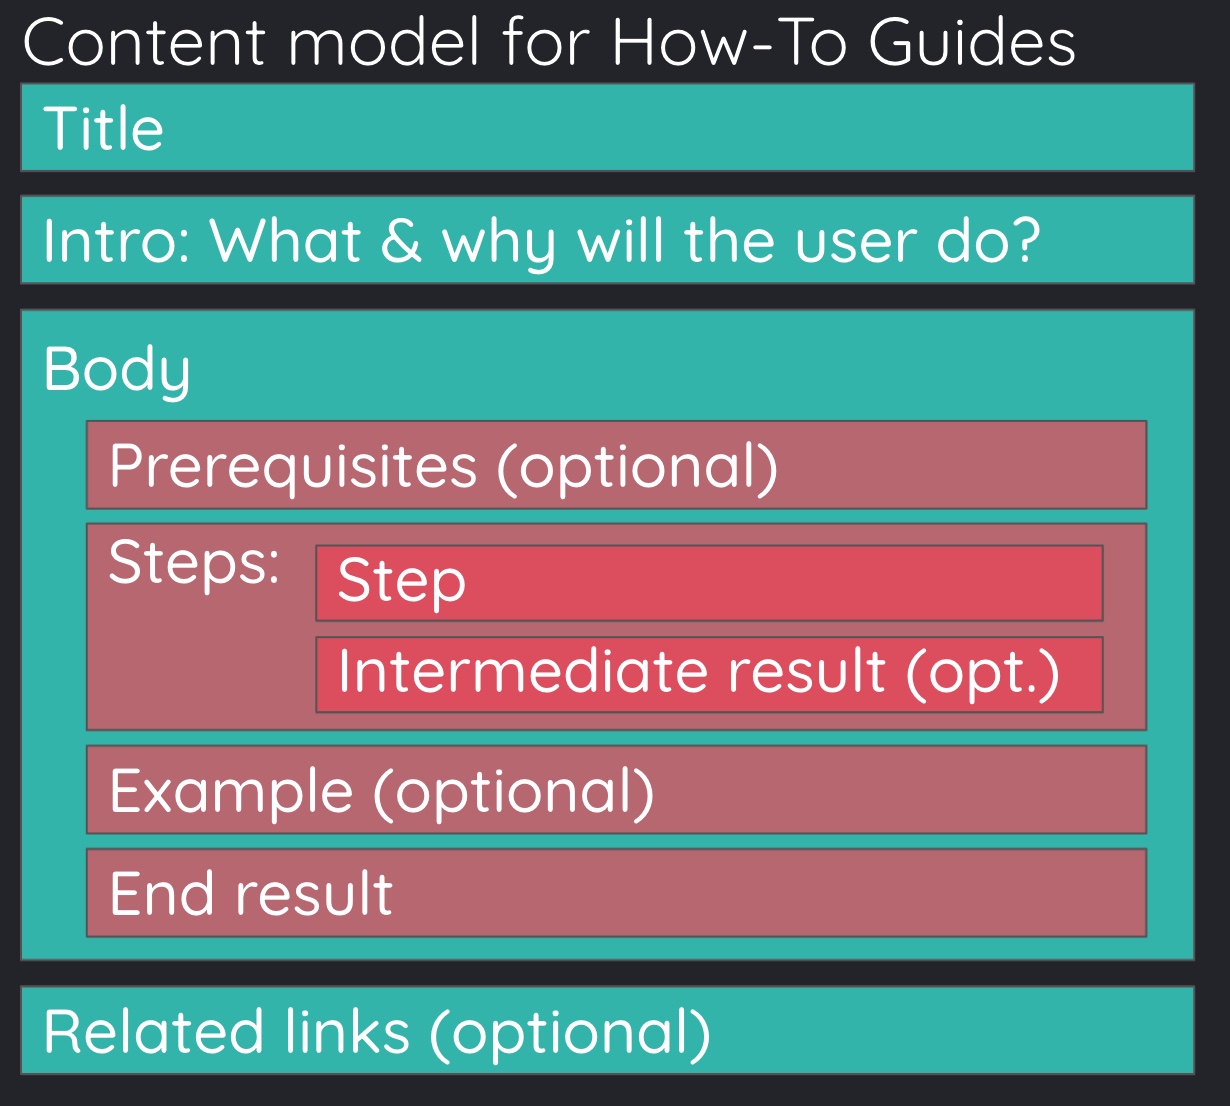 A content model for a how-to guide.